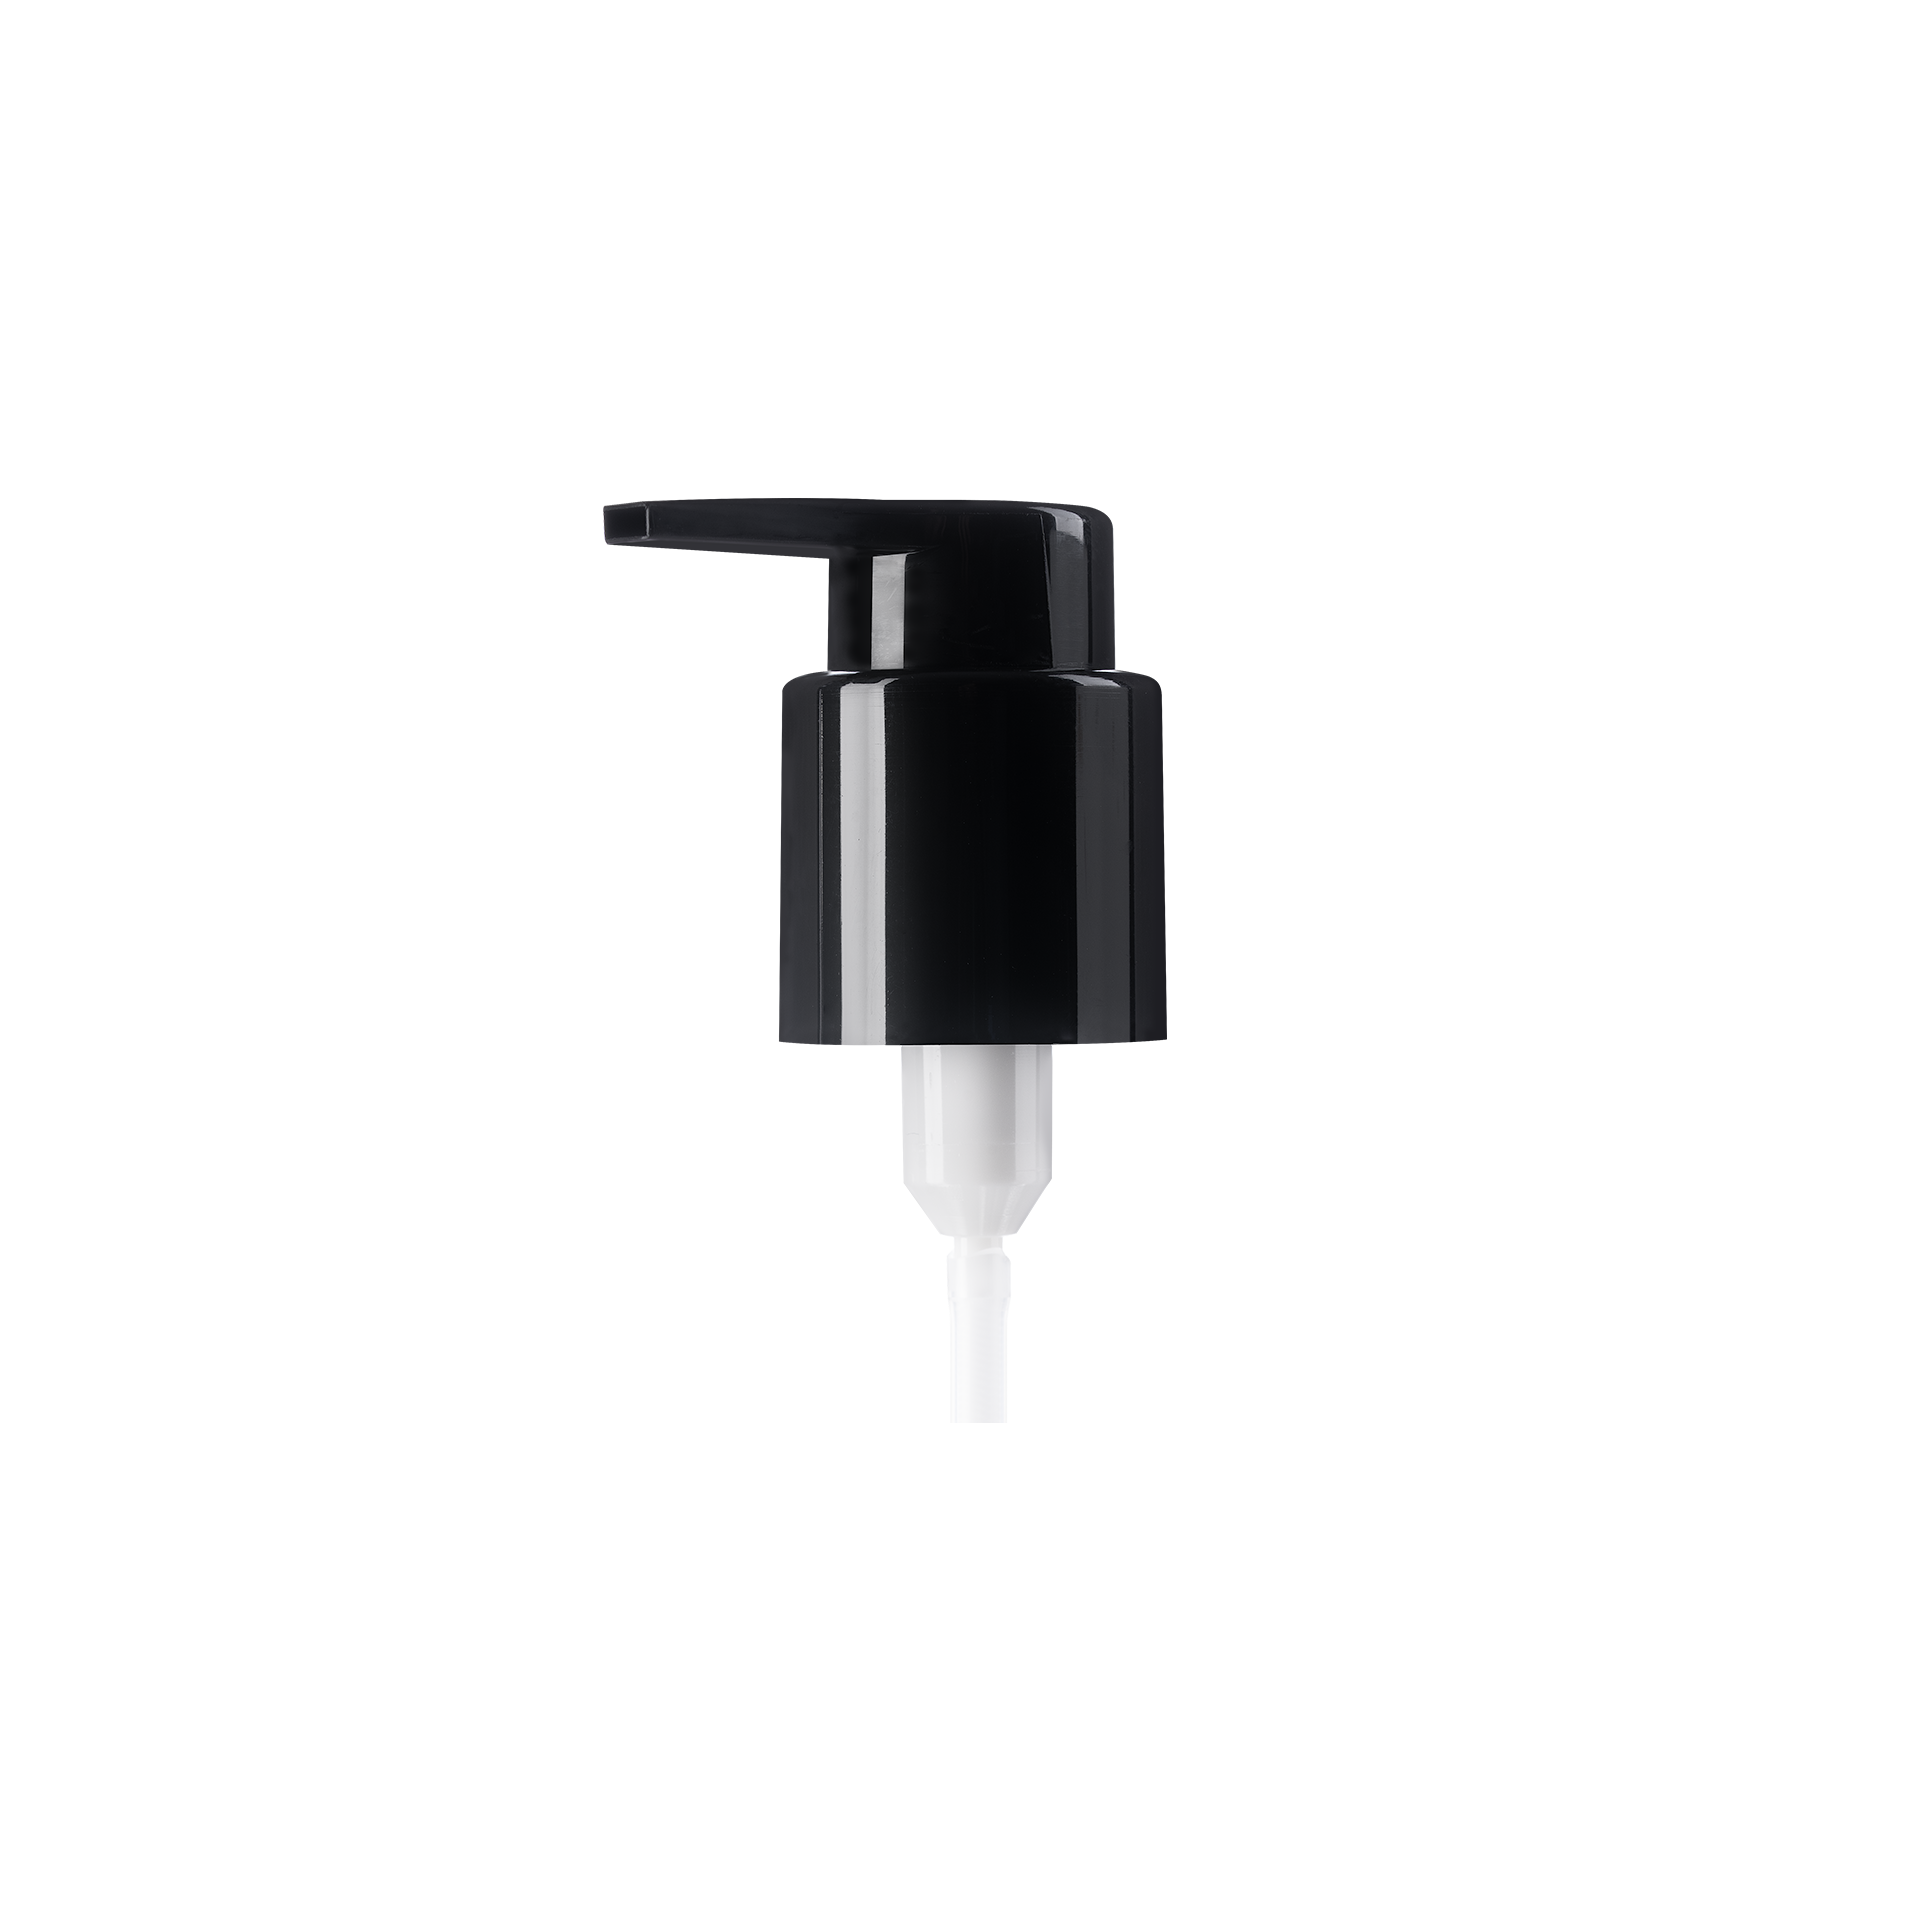 Lotion pump Extended Nozzle 24/410, PP, black, smooth, dose 0.50ml, security clip (Linden 237)